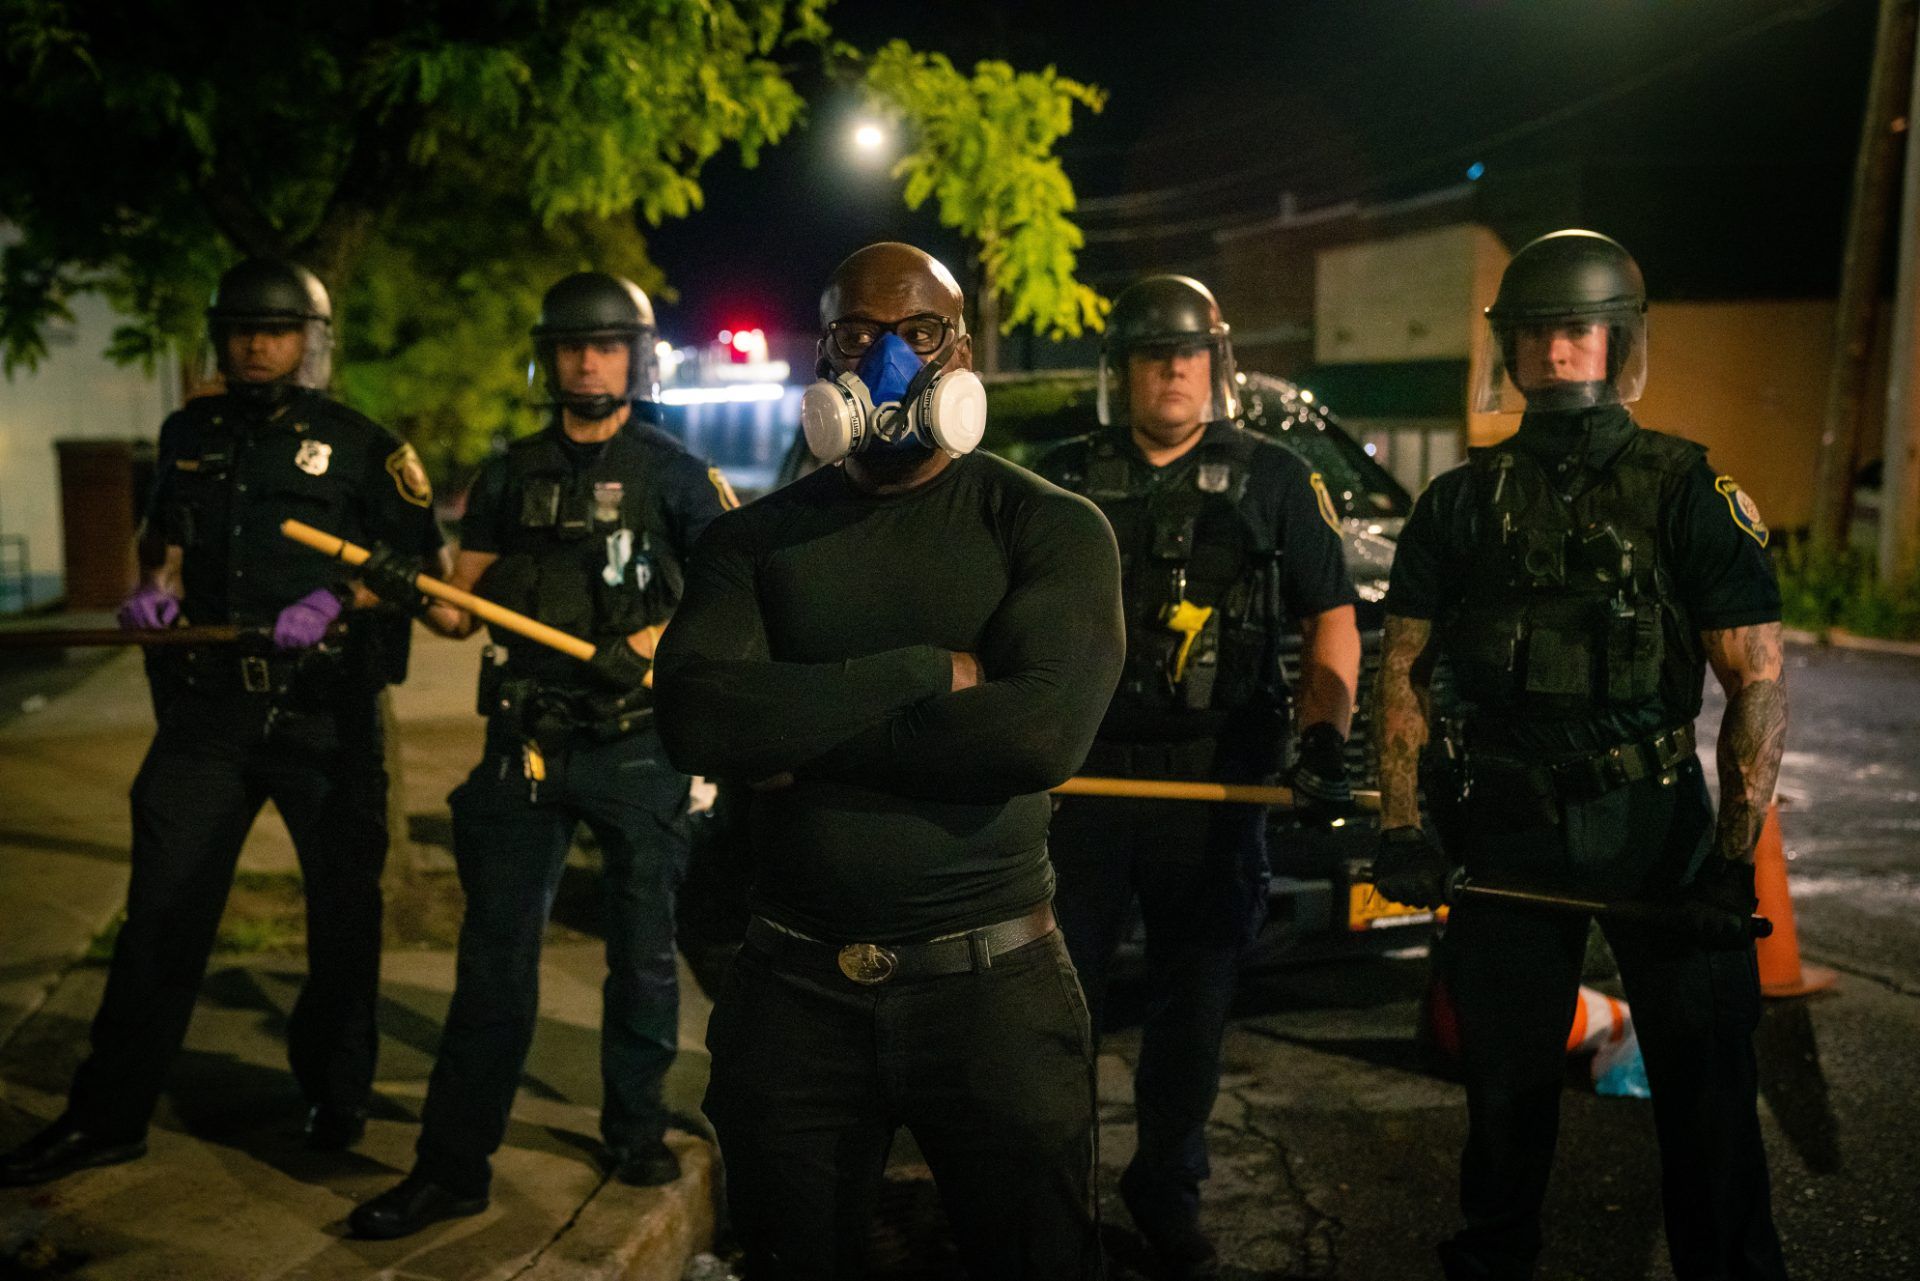 A Black man wearing a gas mask stands in front of a line of police wearing riot gear, facing away - police brutality